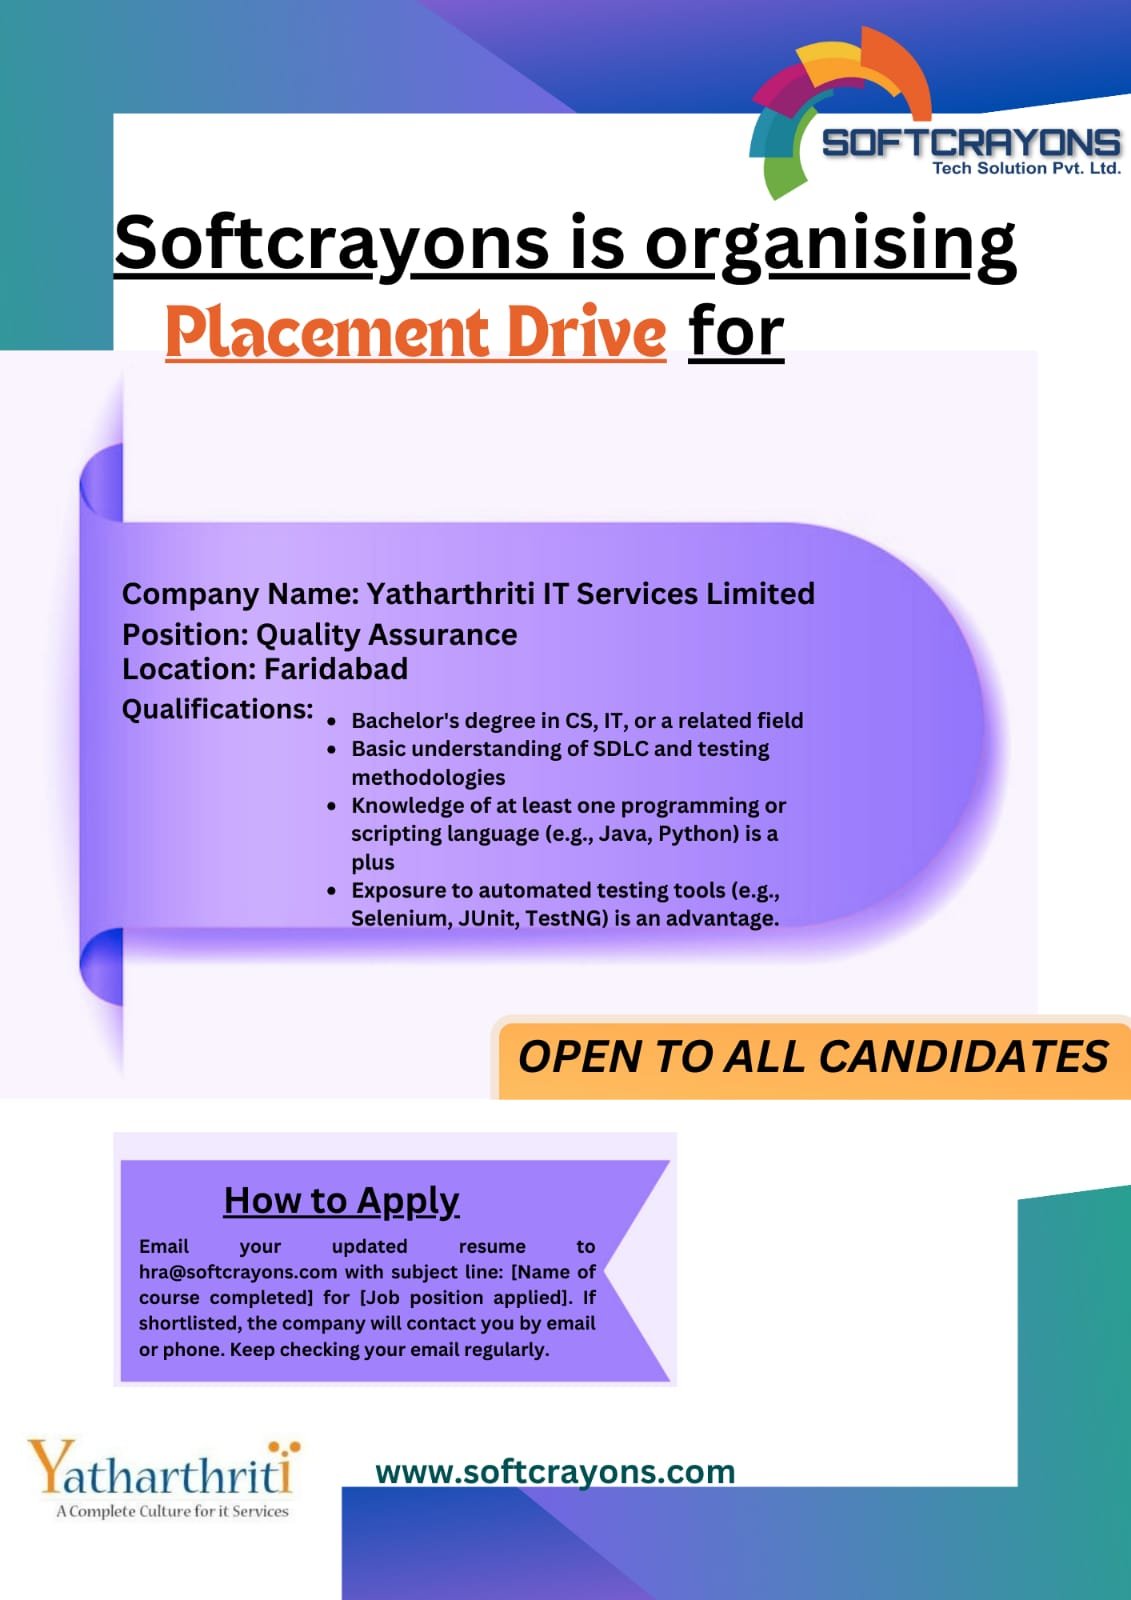 softcrayons is organising placement drive for